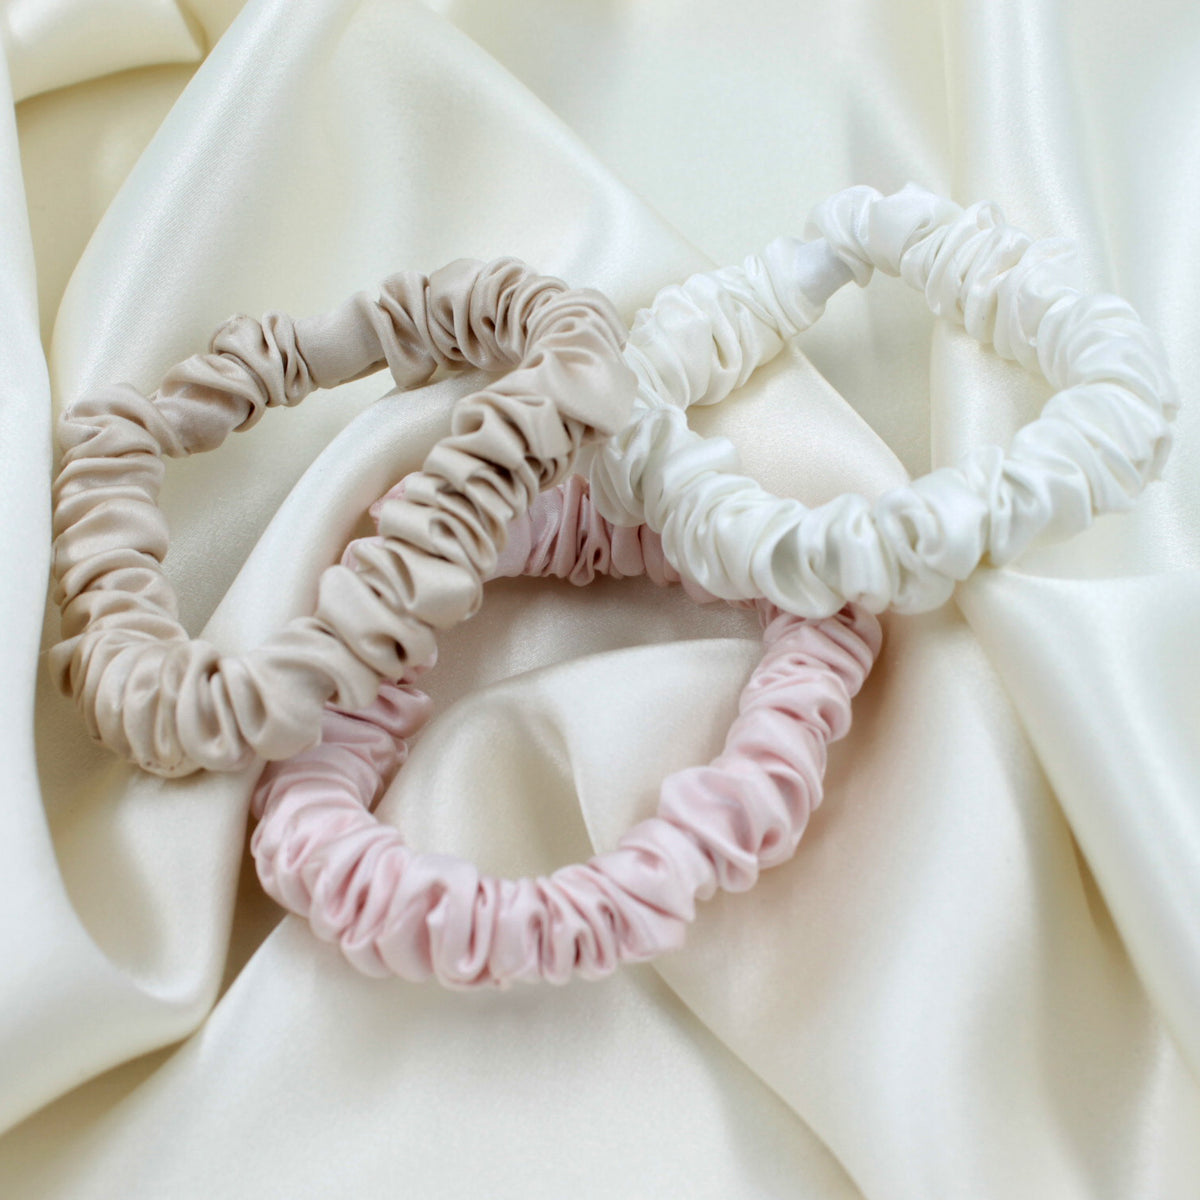 Mulberry Park Silks Doorbuster: Small Scrunchie Set - Ivory, Pink, Sand Layout